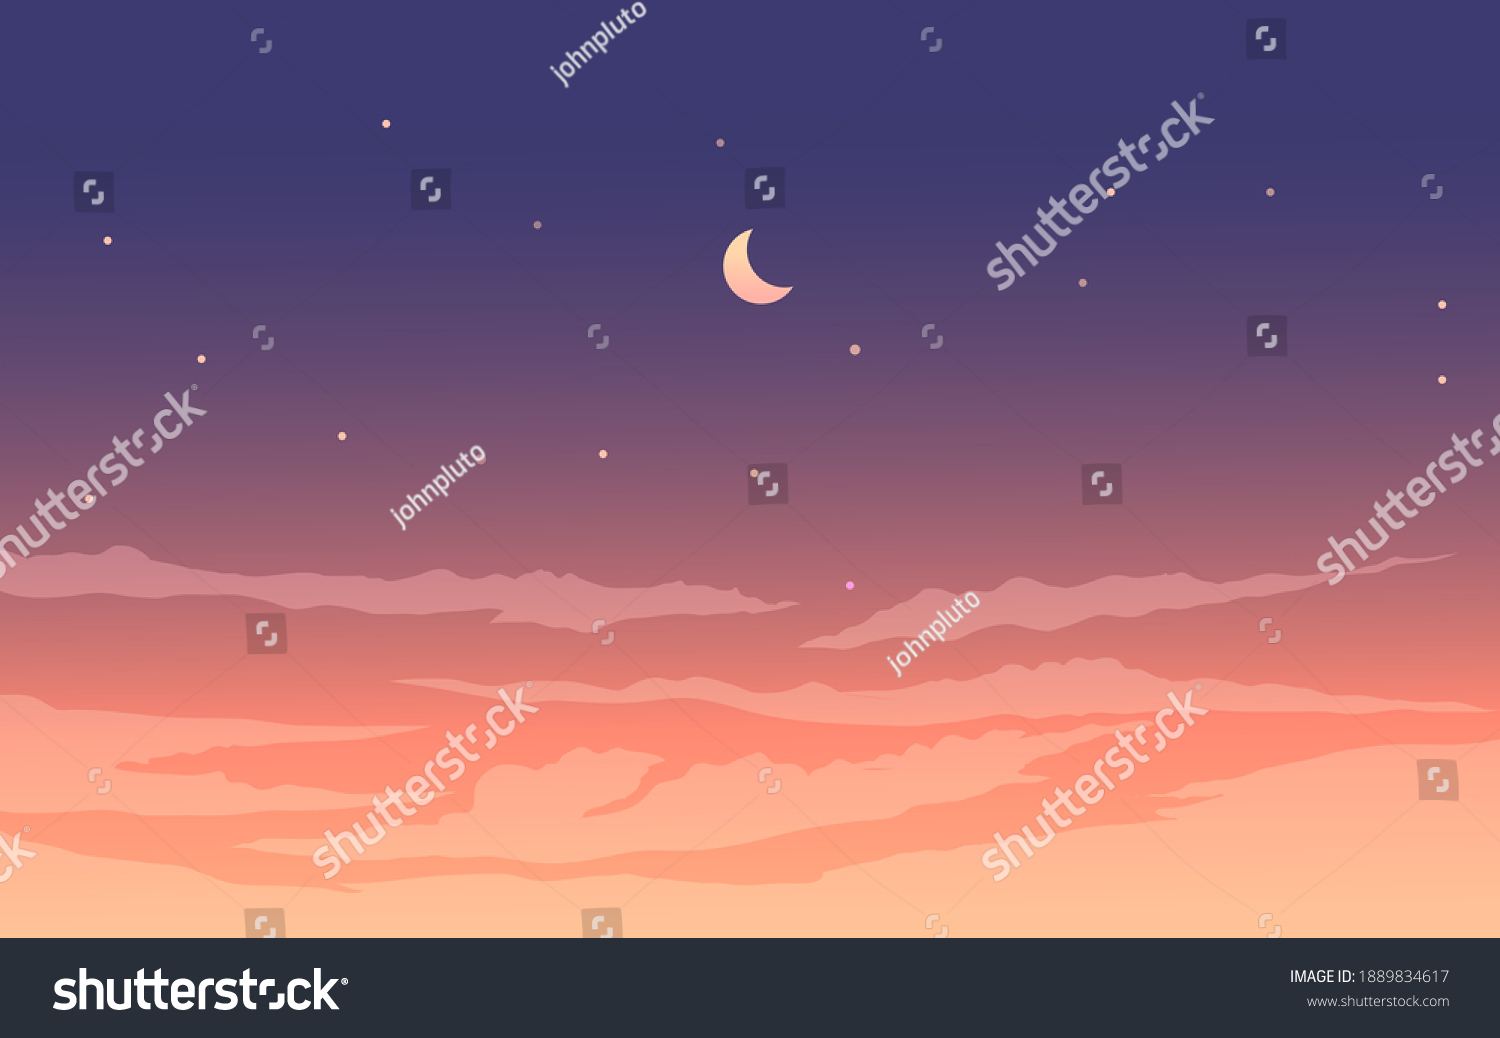 Cloudy night sky with stars and crescent moon #1889834617